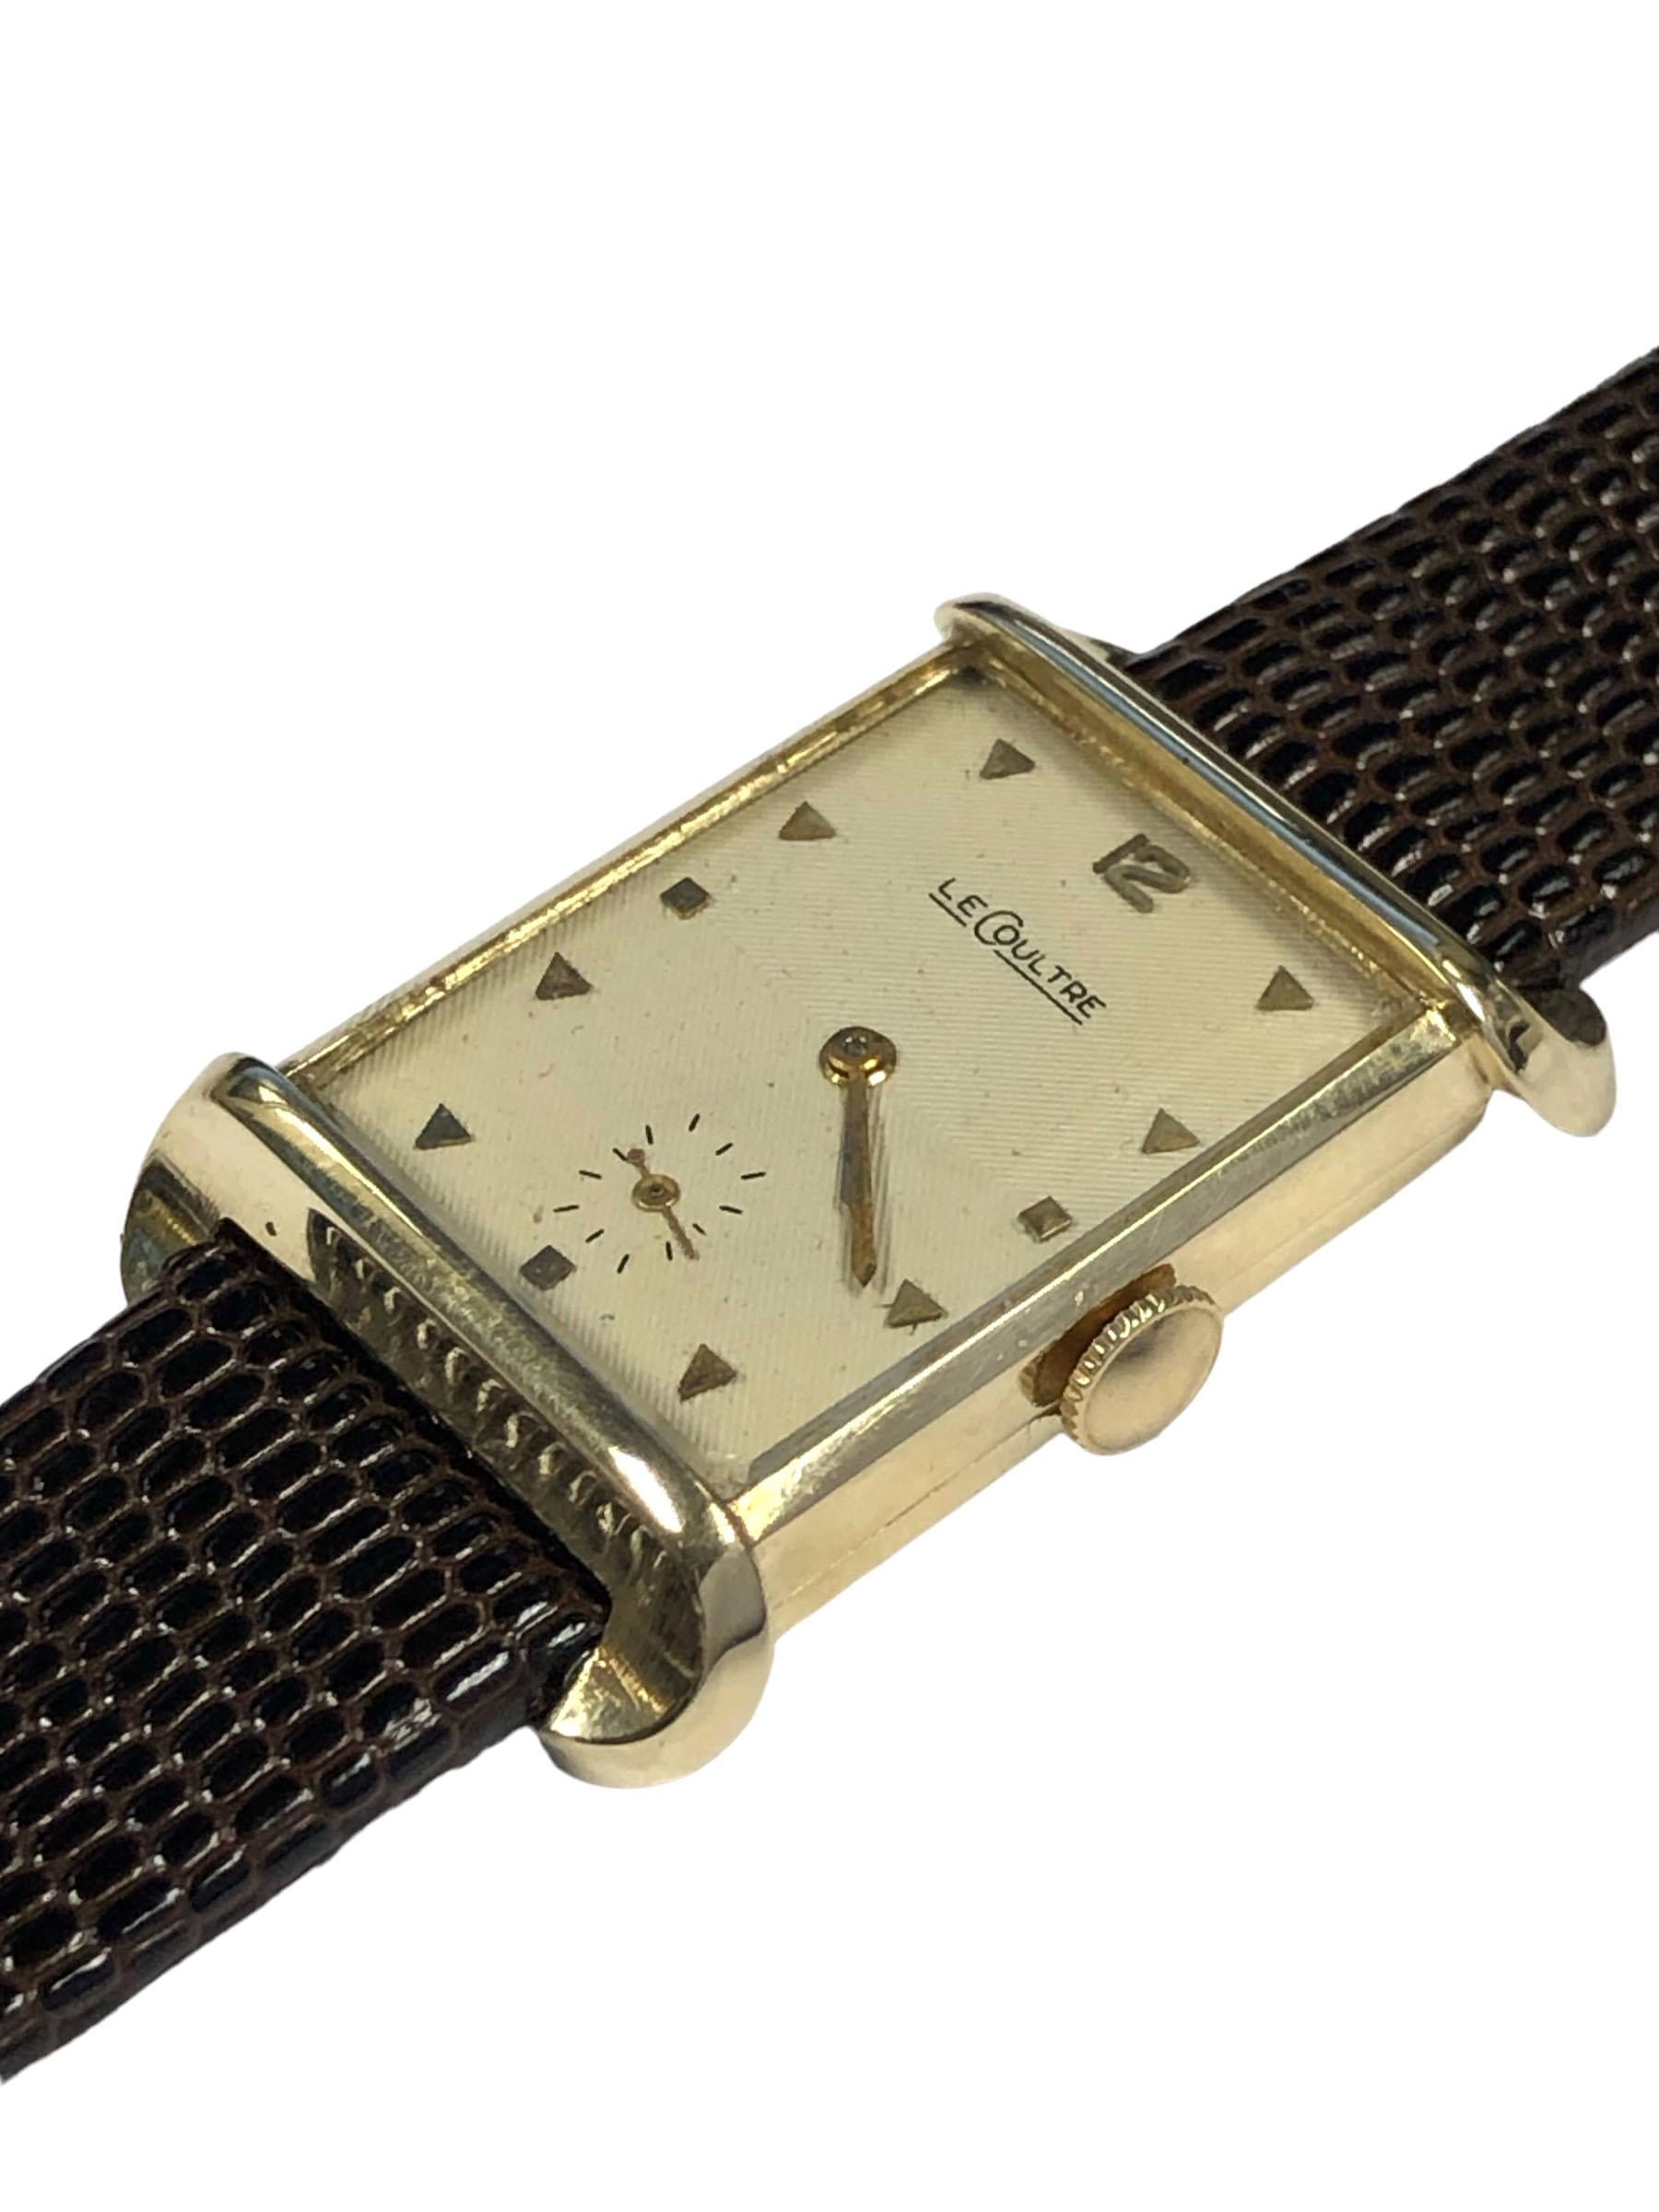 Circa 1950 LeCoultre Tank Wrist Watch, 29 x 21 M.M 2 piece 14k Yellow Gold case with Flared Lugs, 17 jewel, Caliber 438/4CW Nickle Lever, Mechanical, Manual wind movement, original Silver / White engraved striped, textured dial with raised Gold